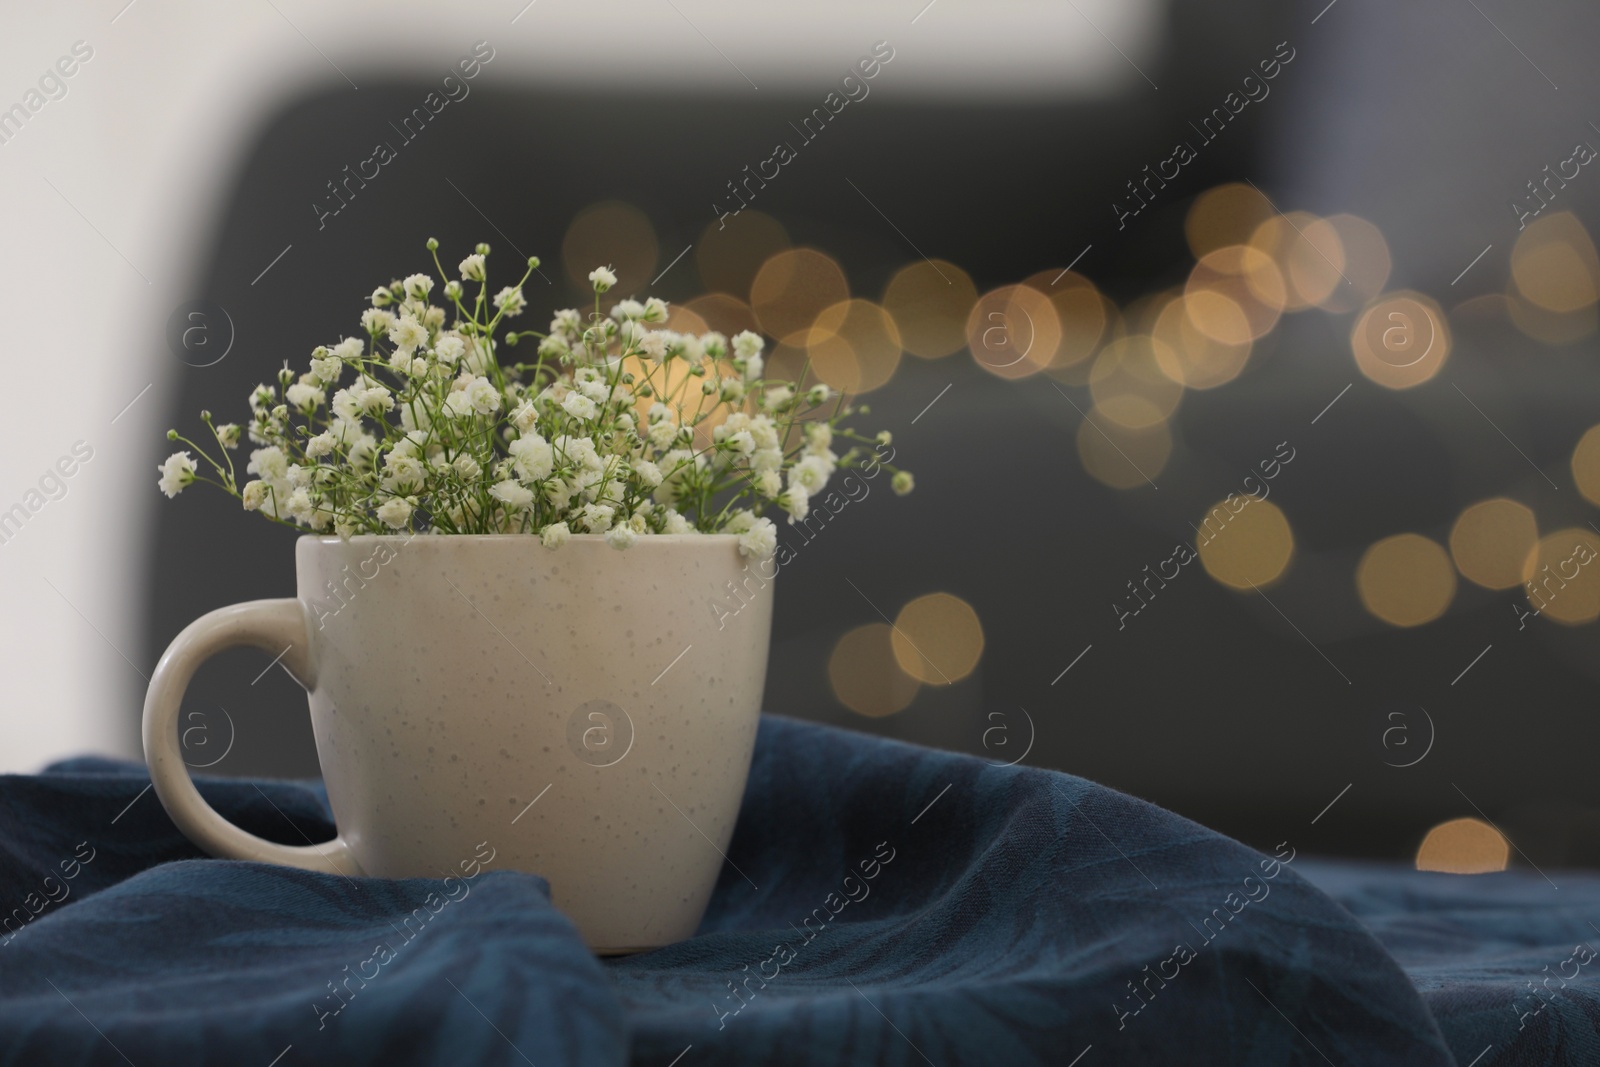 Photo of Cup with tiny flowers on soft knitted blanket against blurred lights. Space for text